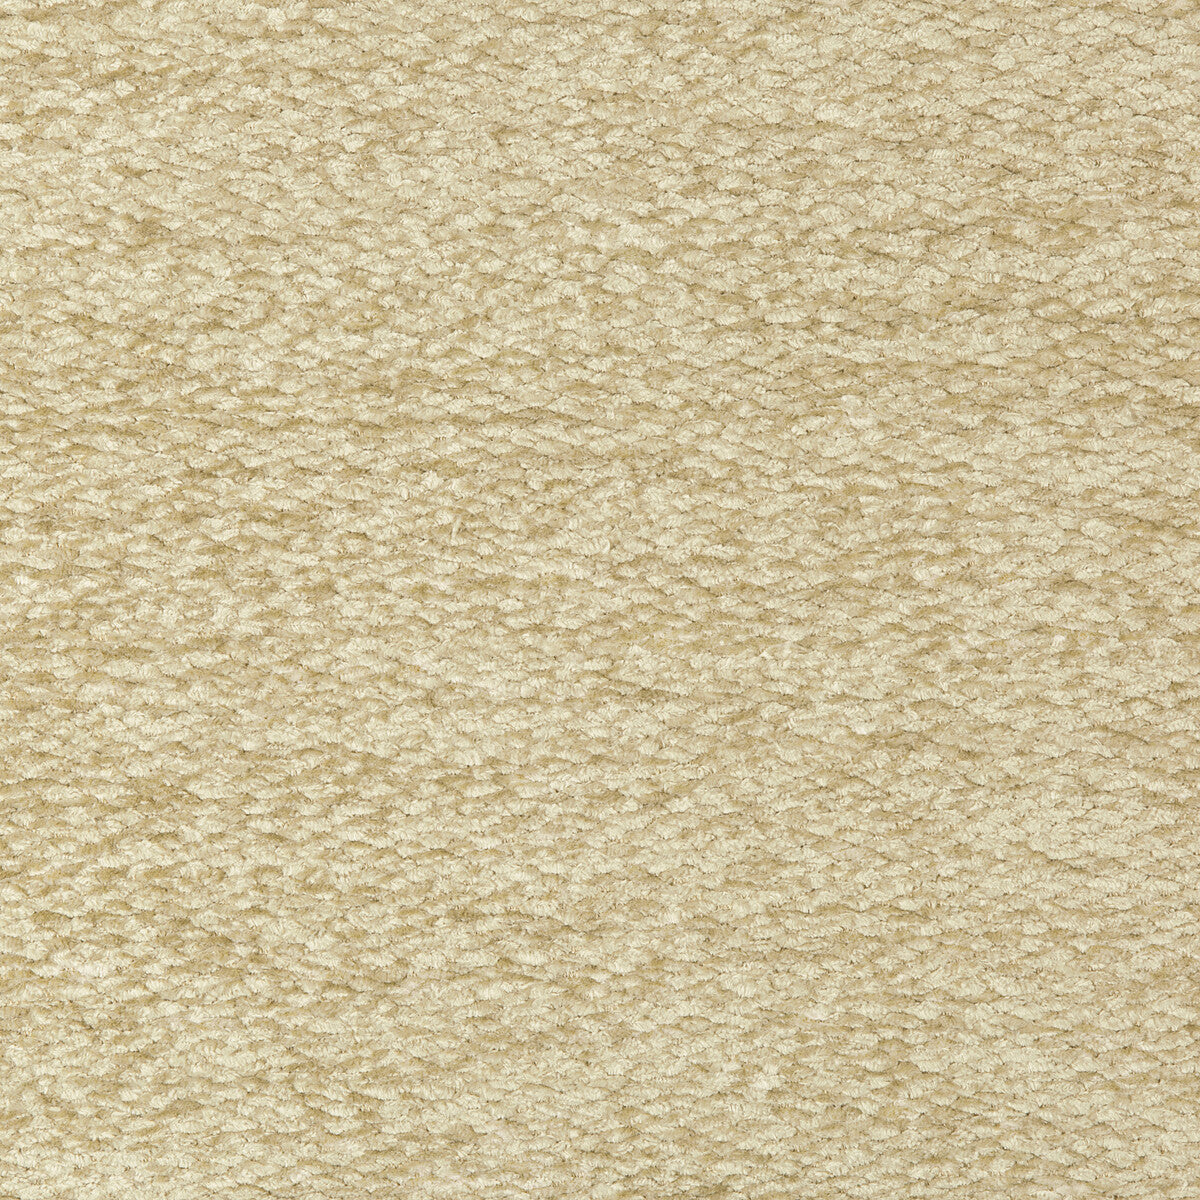 Clery Texture fabric in sand color - pattern 8019150.16.0 - by Brunschwig &amp; Fils in the Chambery Textures II collection